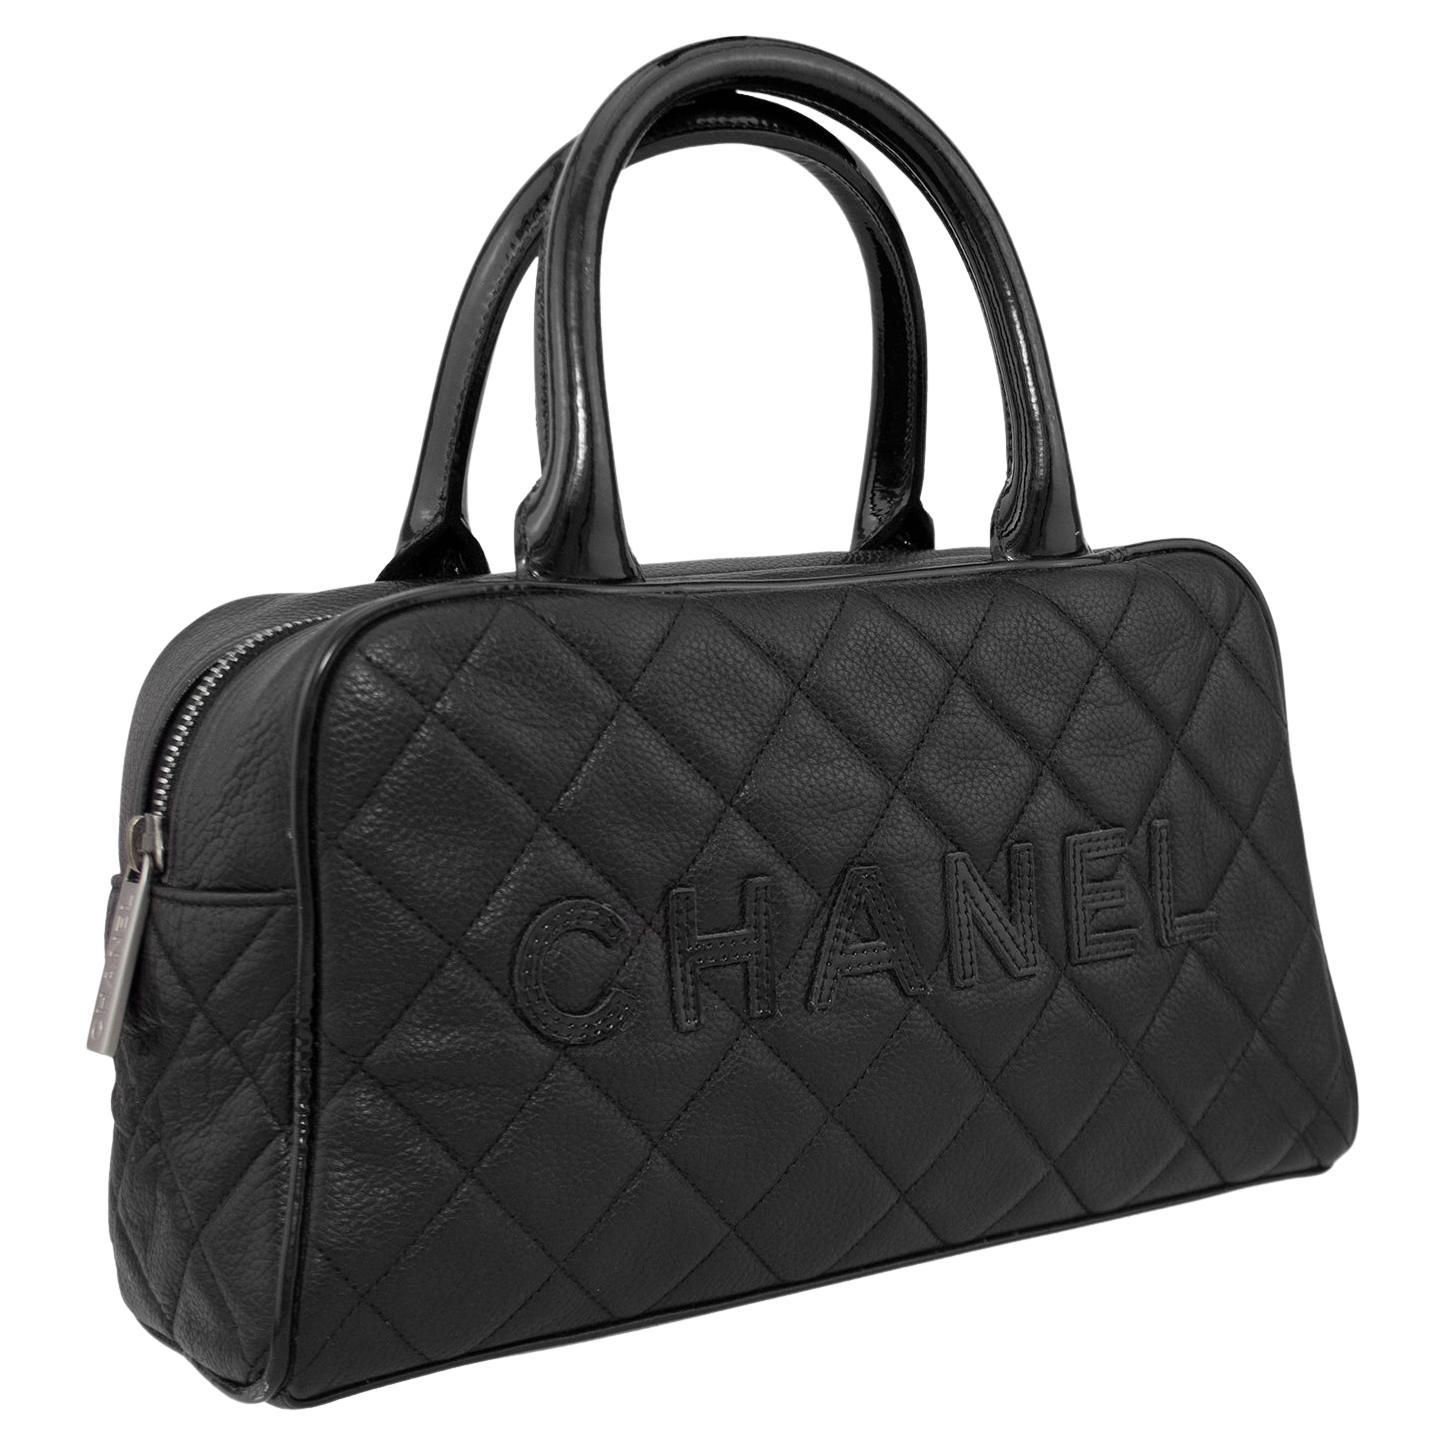 Designed between 2000-2002 by Karl Lagerfeld, this is a black quilted caviar leather mini bowler bag. Contrasting patent leather trim and top handles. Caviar leather is durable and water resistant, meant to imitate the look of exotic skin. Patent